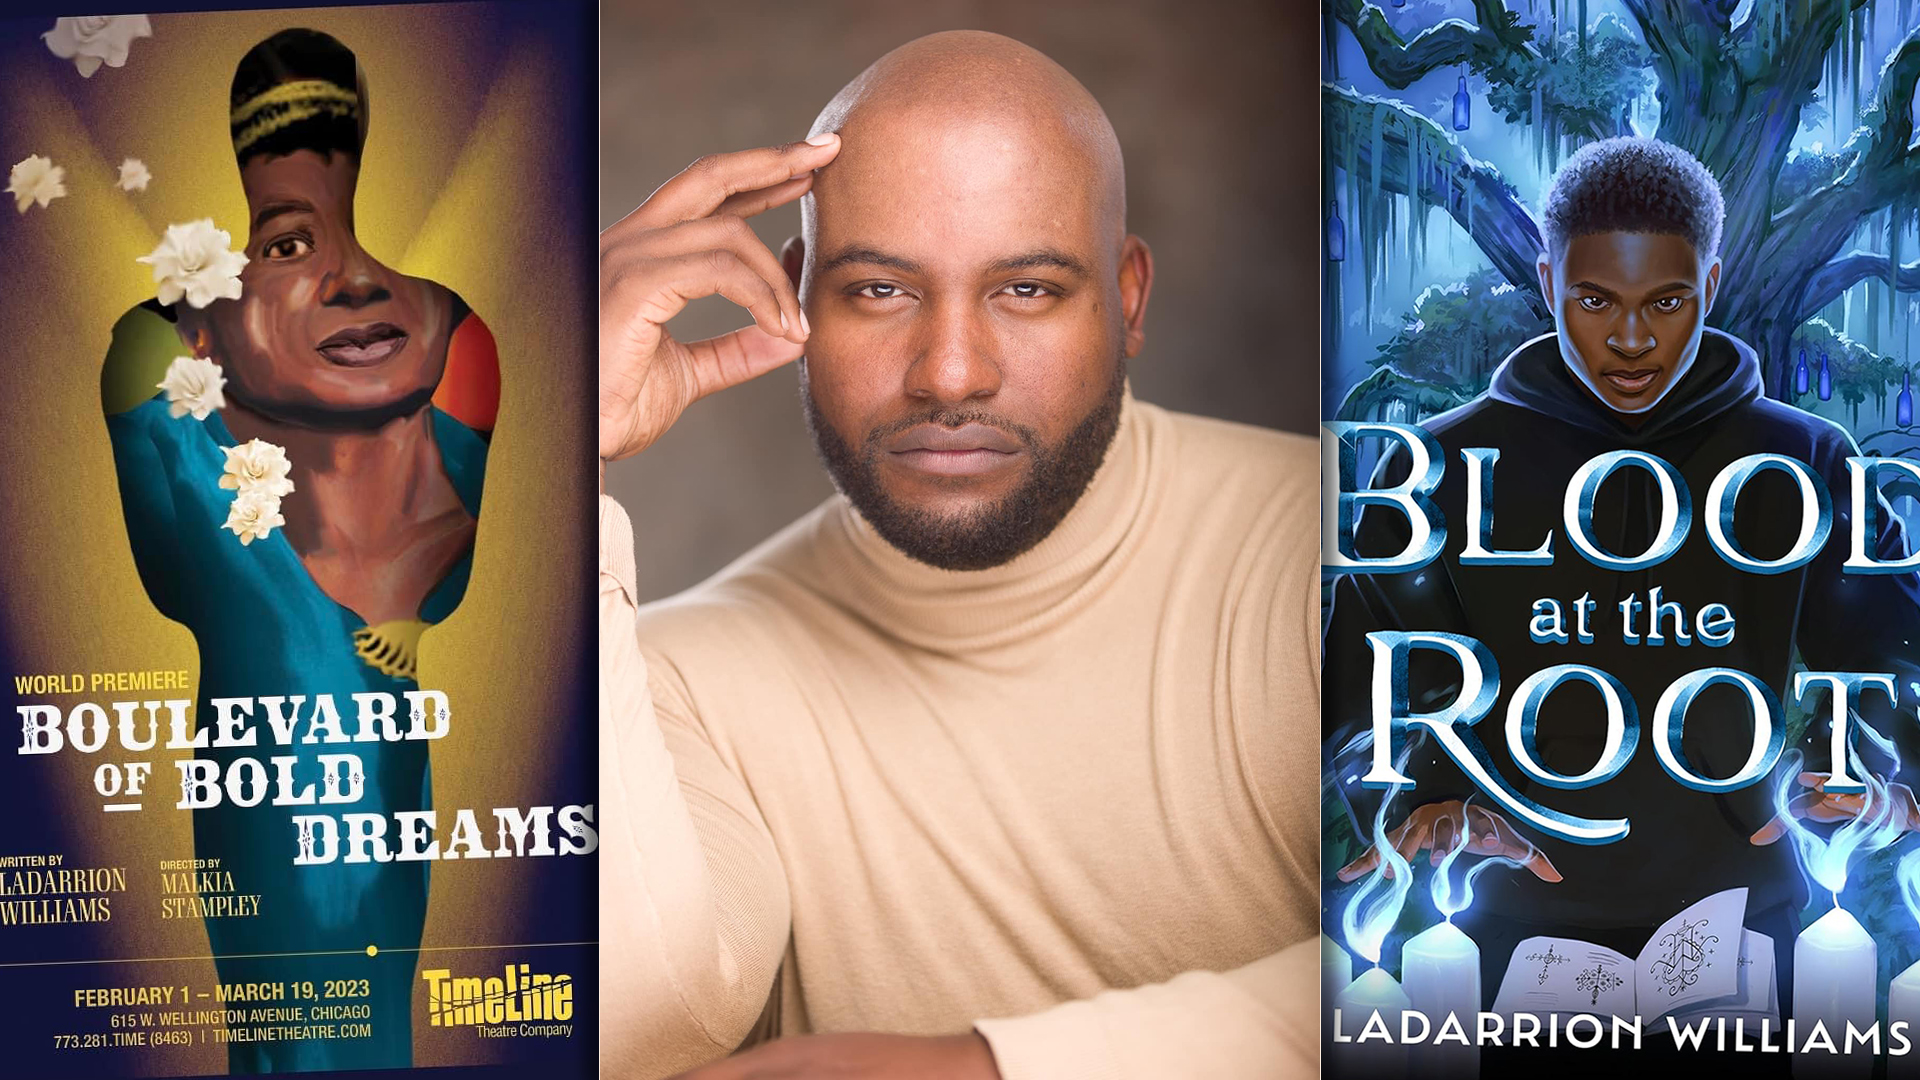 LaDarrion Williams, playwright of Boulevard of Bold Dreams, and author of Blood at the Root